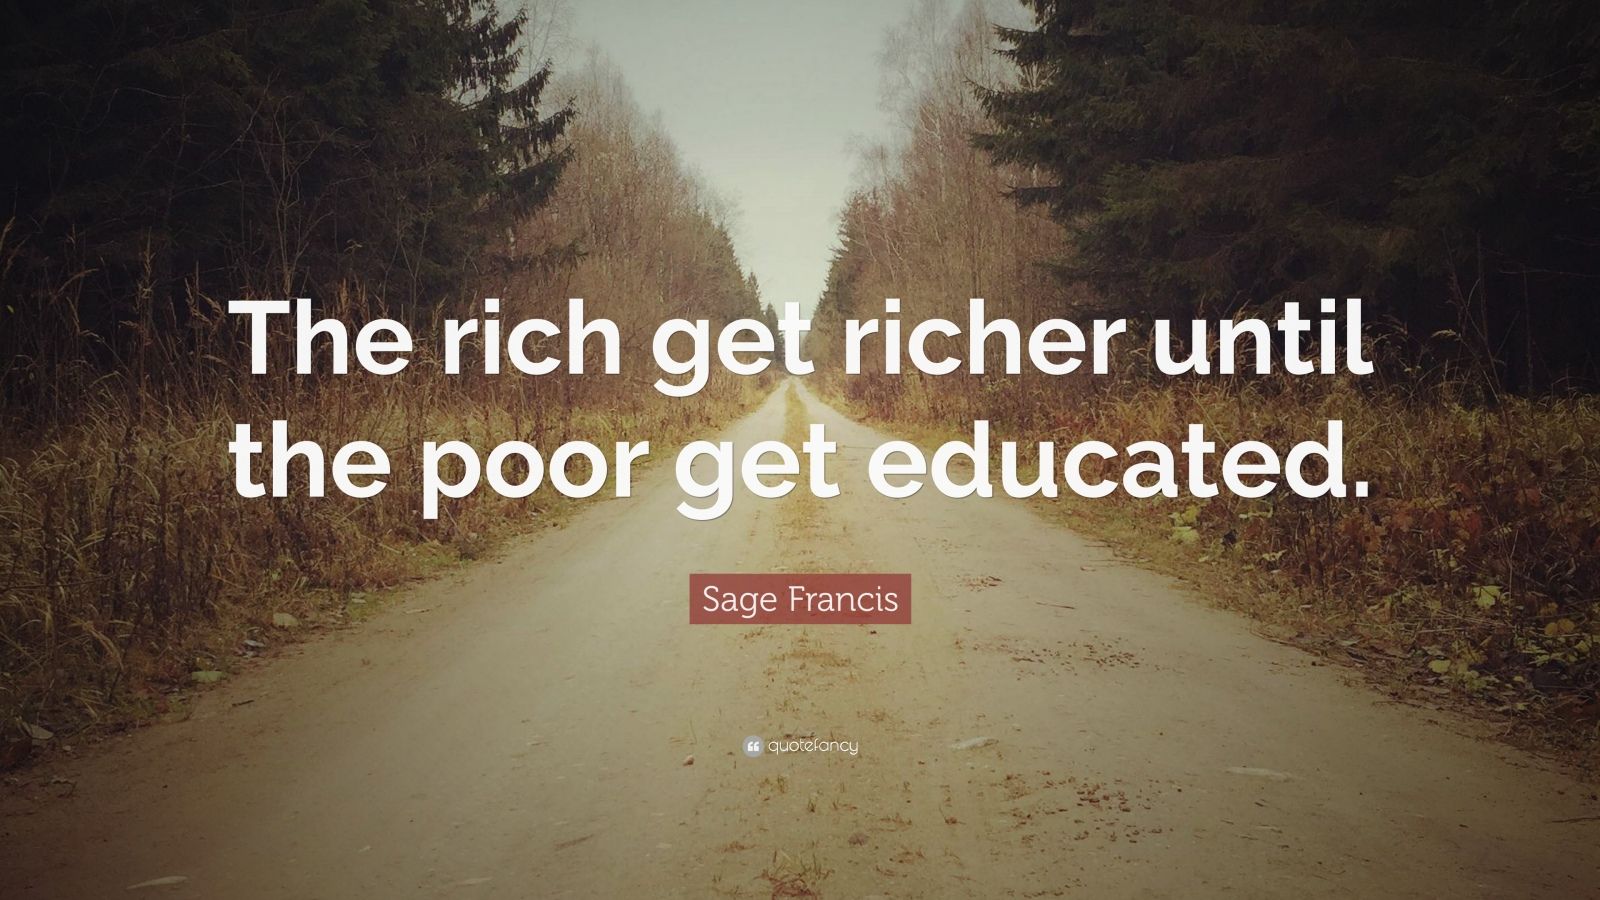 Sage Francis Quote: “The rich get richer until the poor get educated